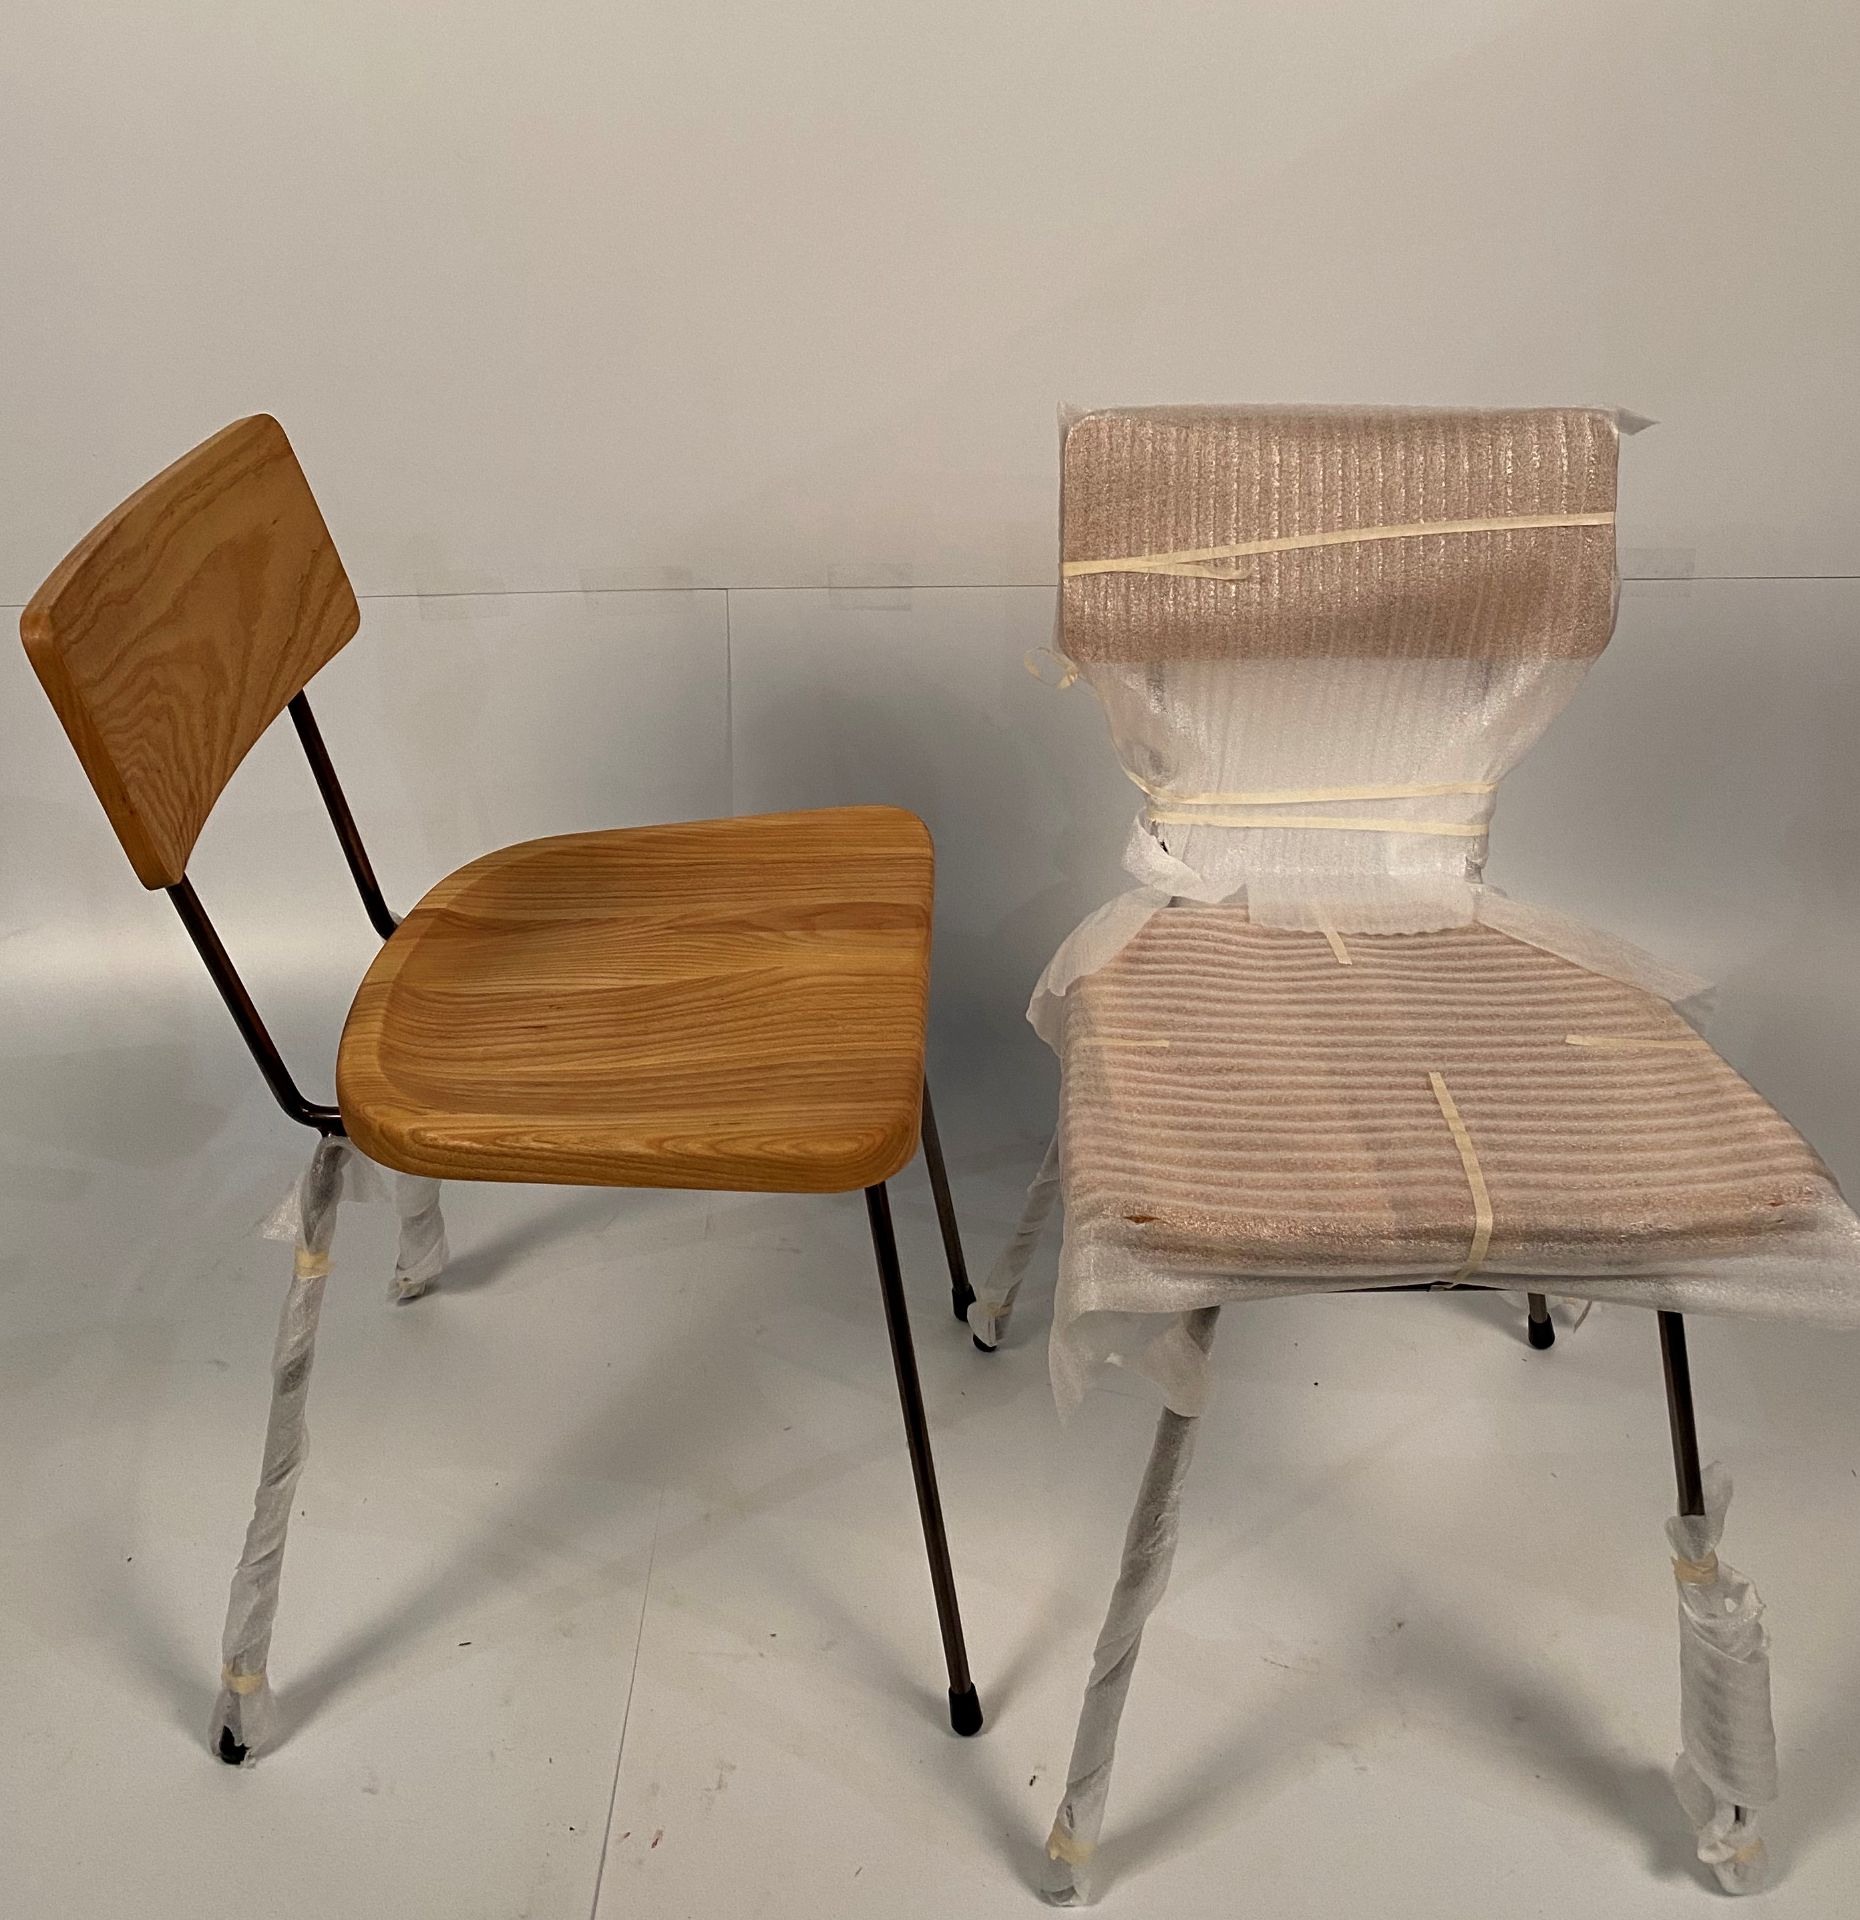 4 x College wooden chairs with metal frames - Image 2 of 4